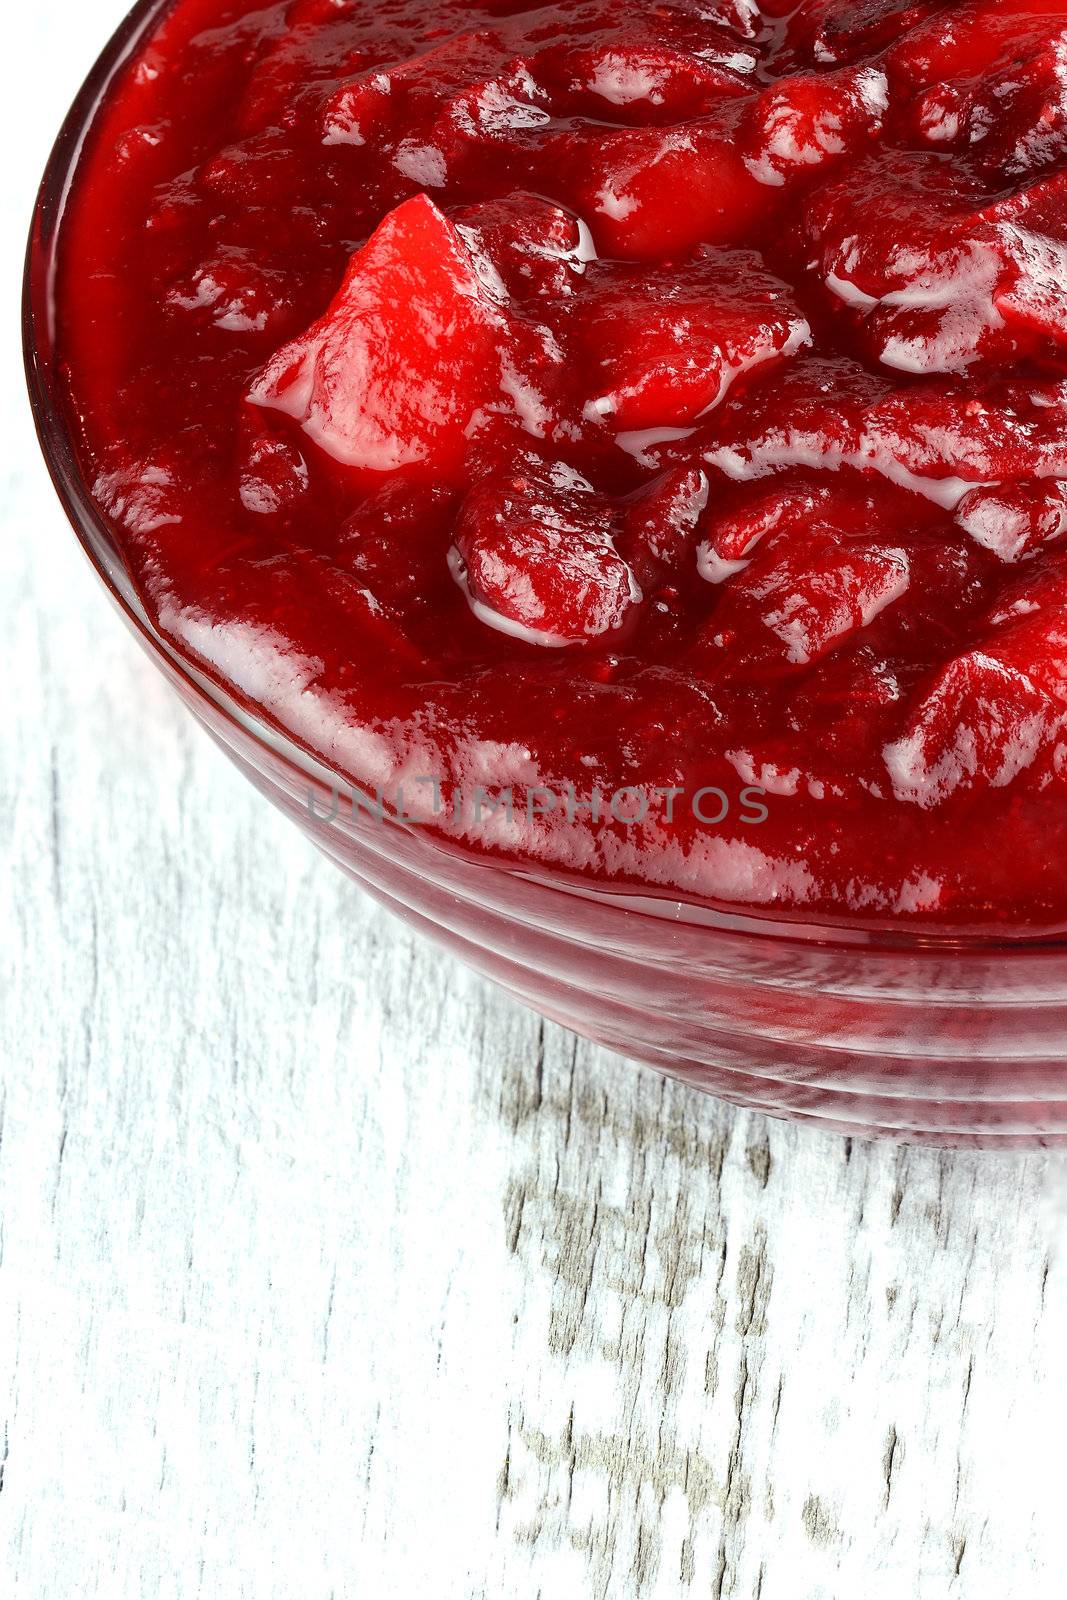 Fresh cranberry apple sauce over a white rustic background. Shallow depth of field.

